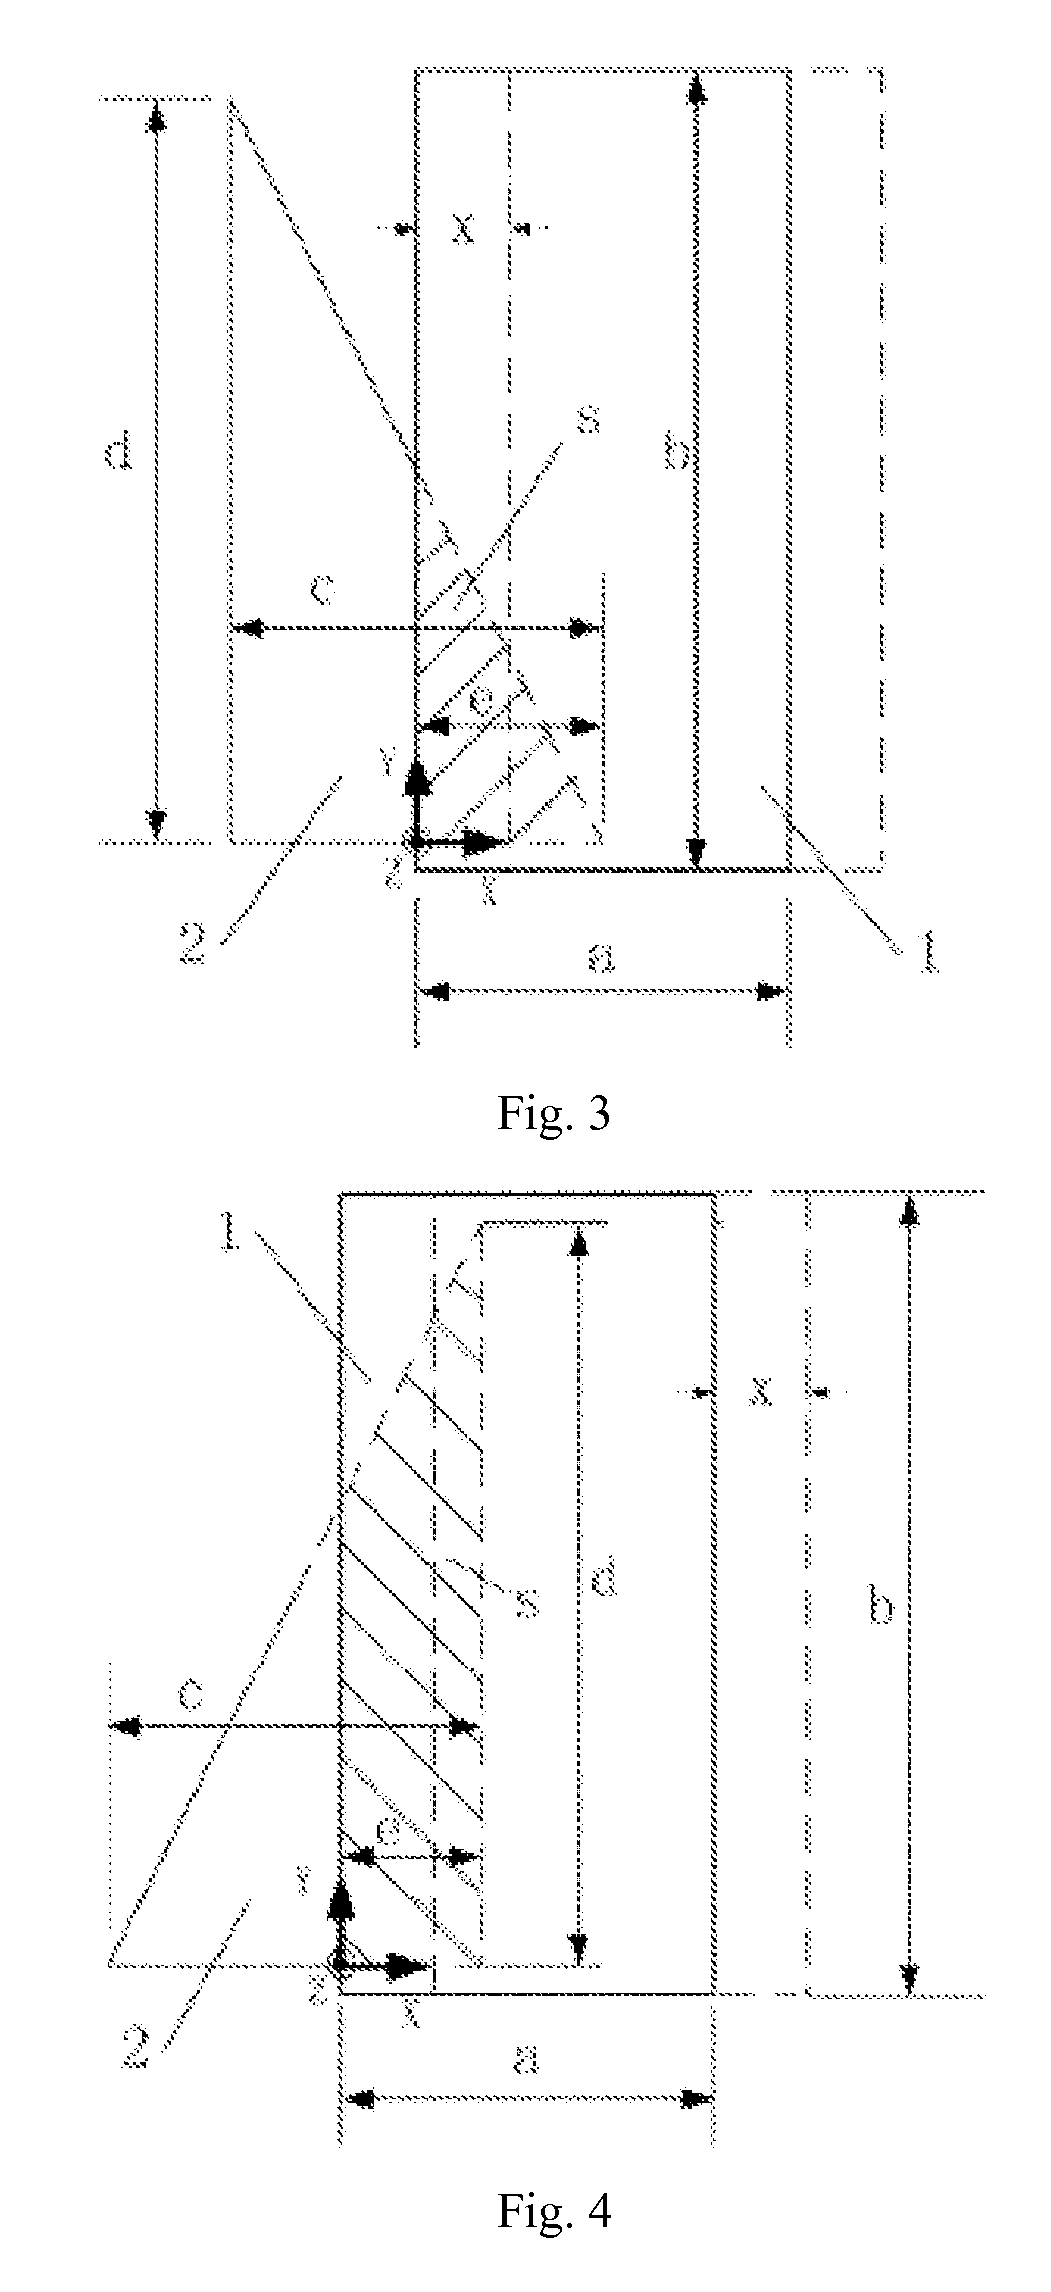 Variable-area capacitor structure, comb grid capacitor accelerometer and comb grid capacitor gyroscope